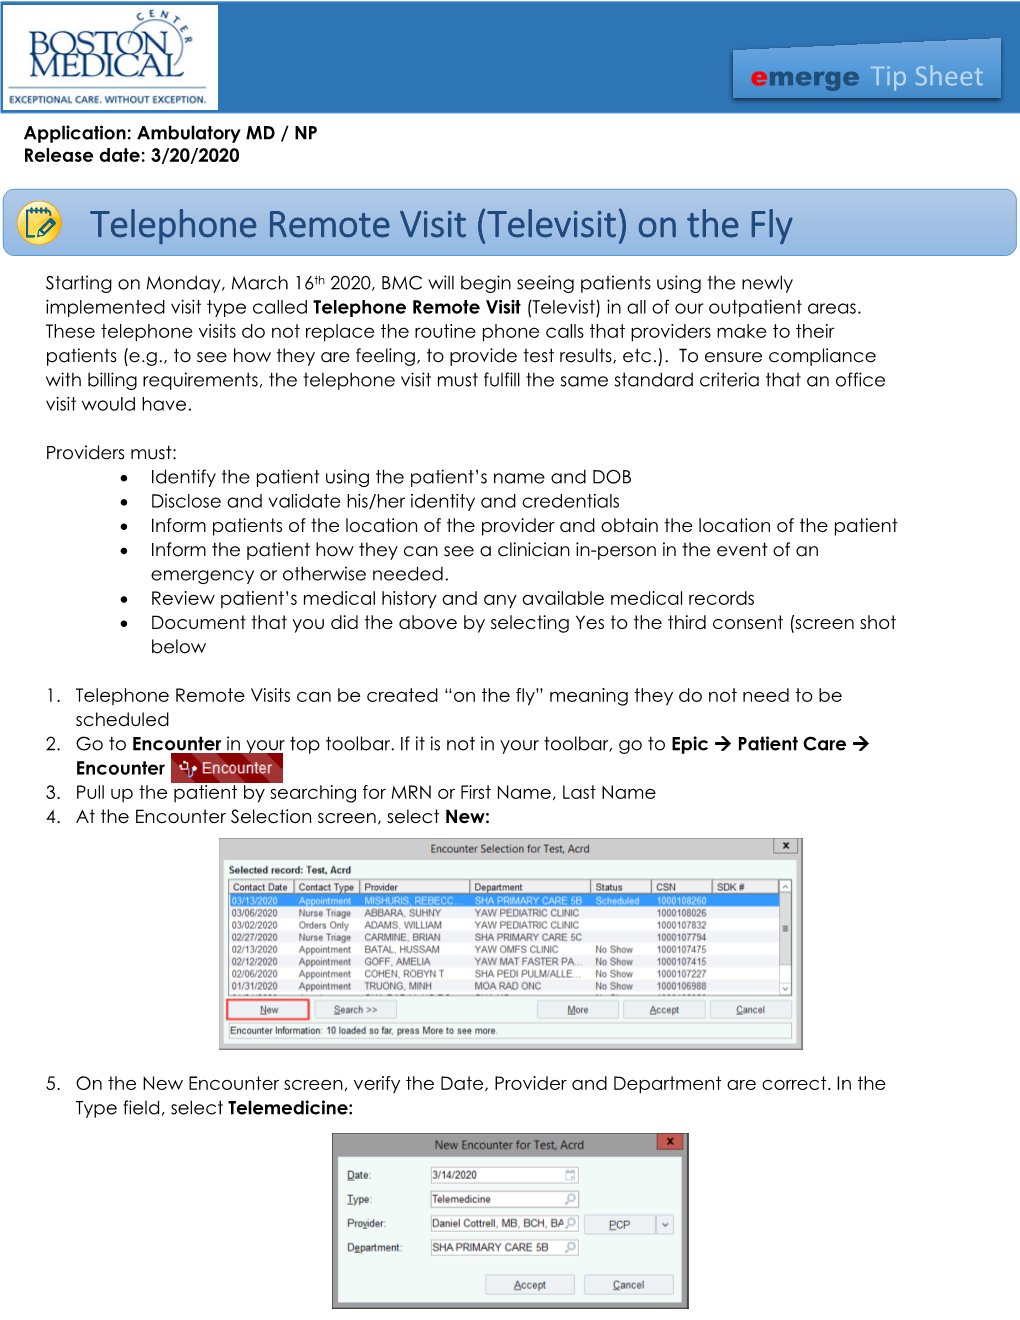 Telephone Remote Visit (Televisit) on the Fly